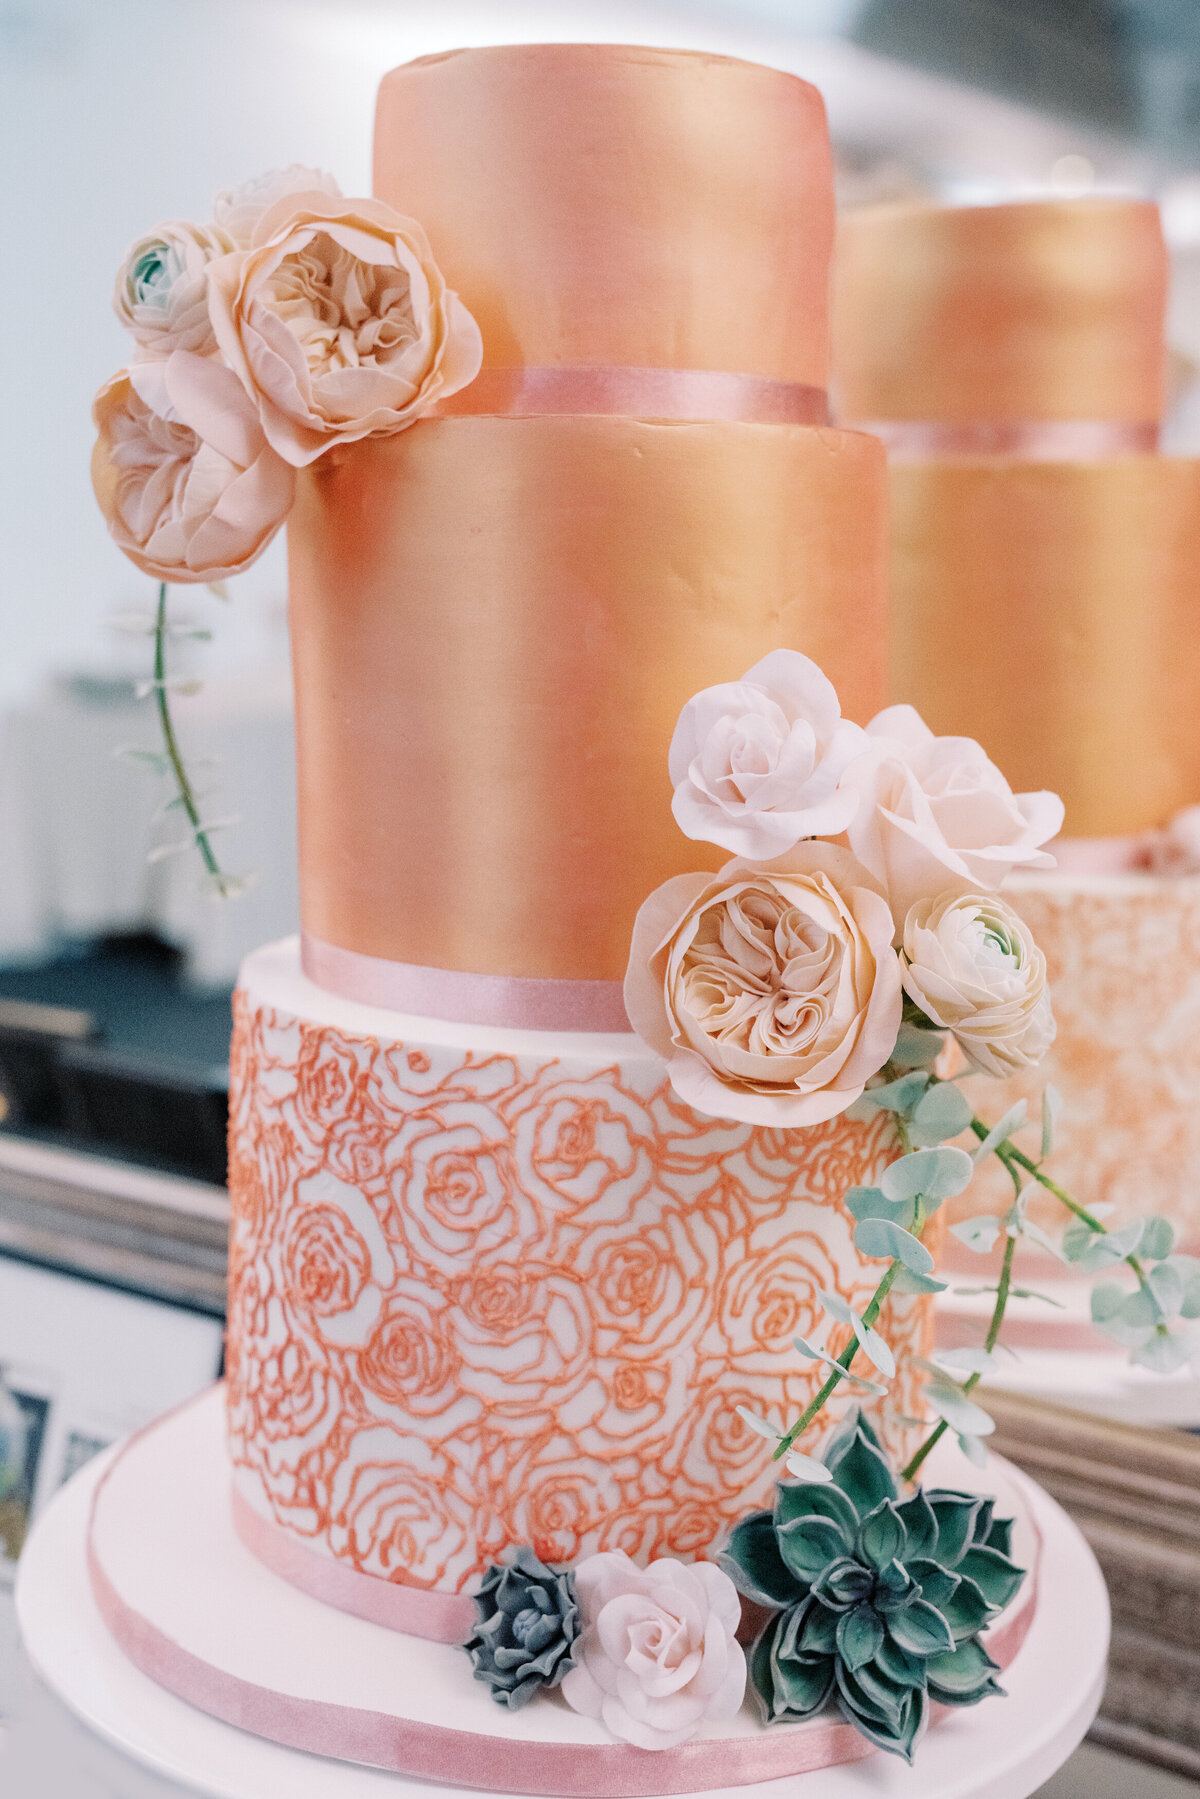 Rose gold 3 tier wedding cake with stenciled roses on bottom tier, sugar flower roses, ranunculus, succulents, and eucalyptus